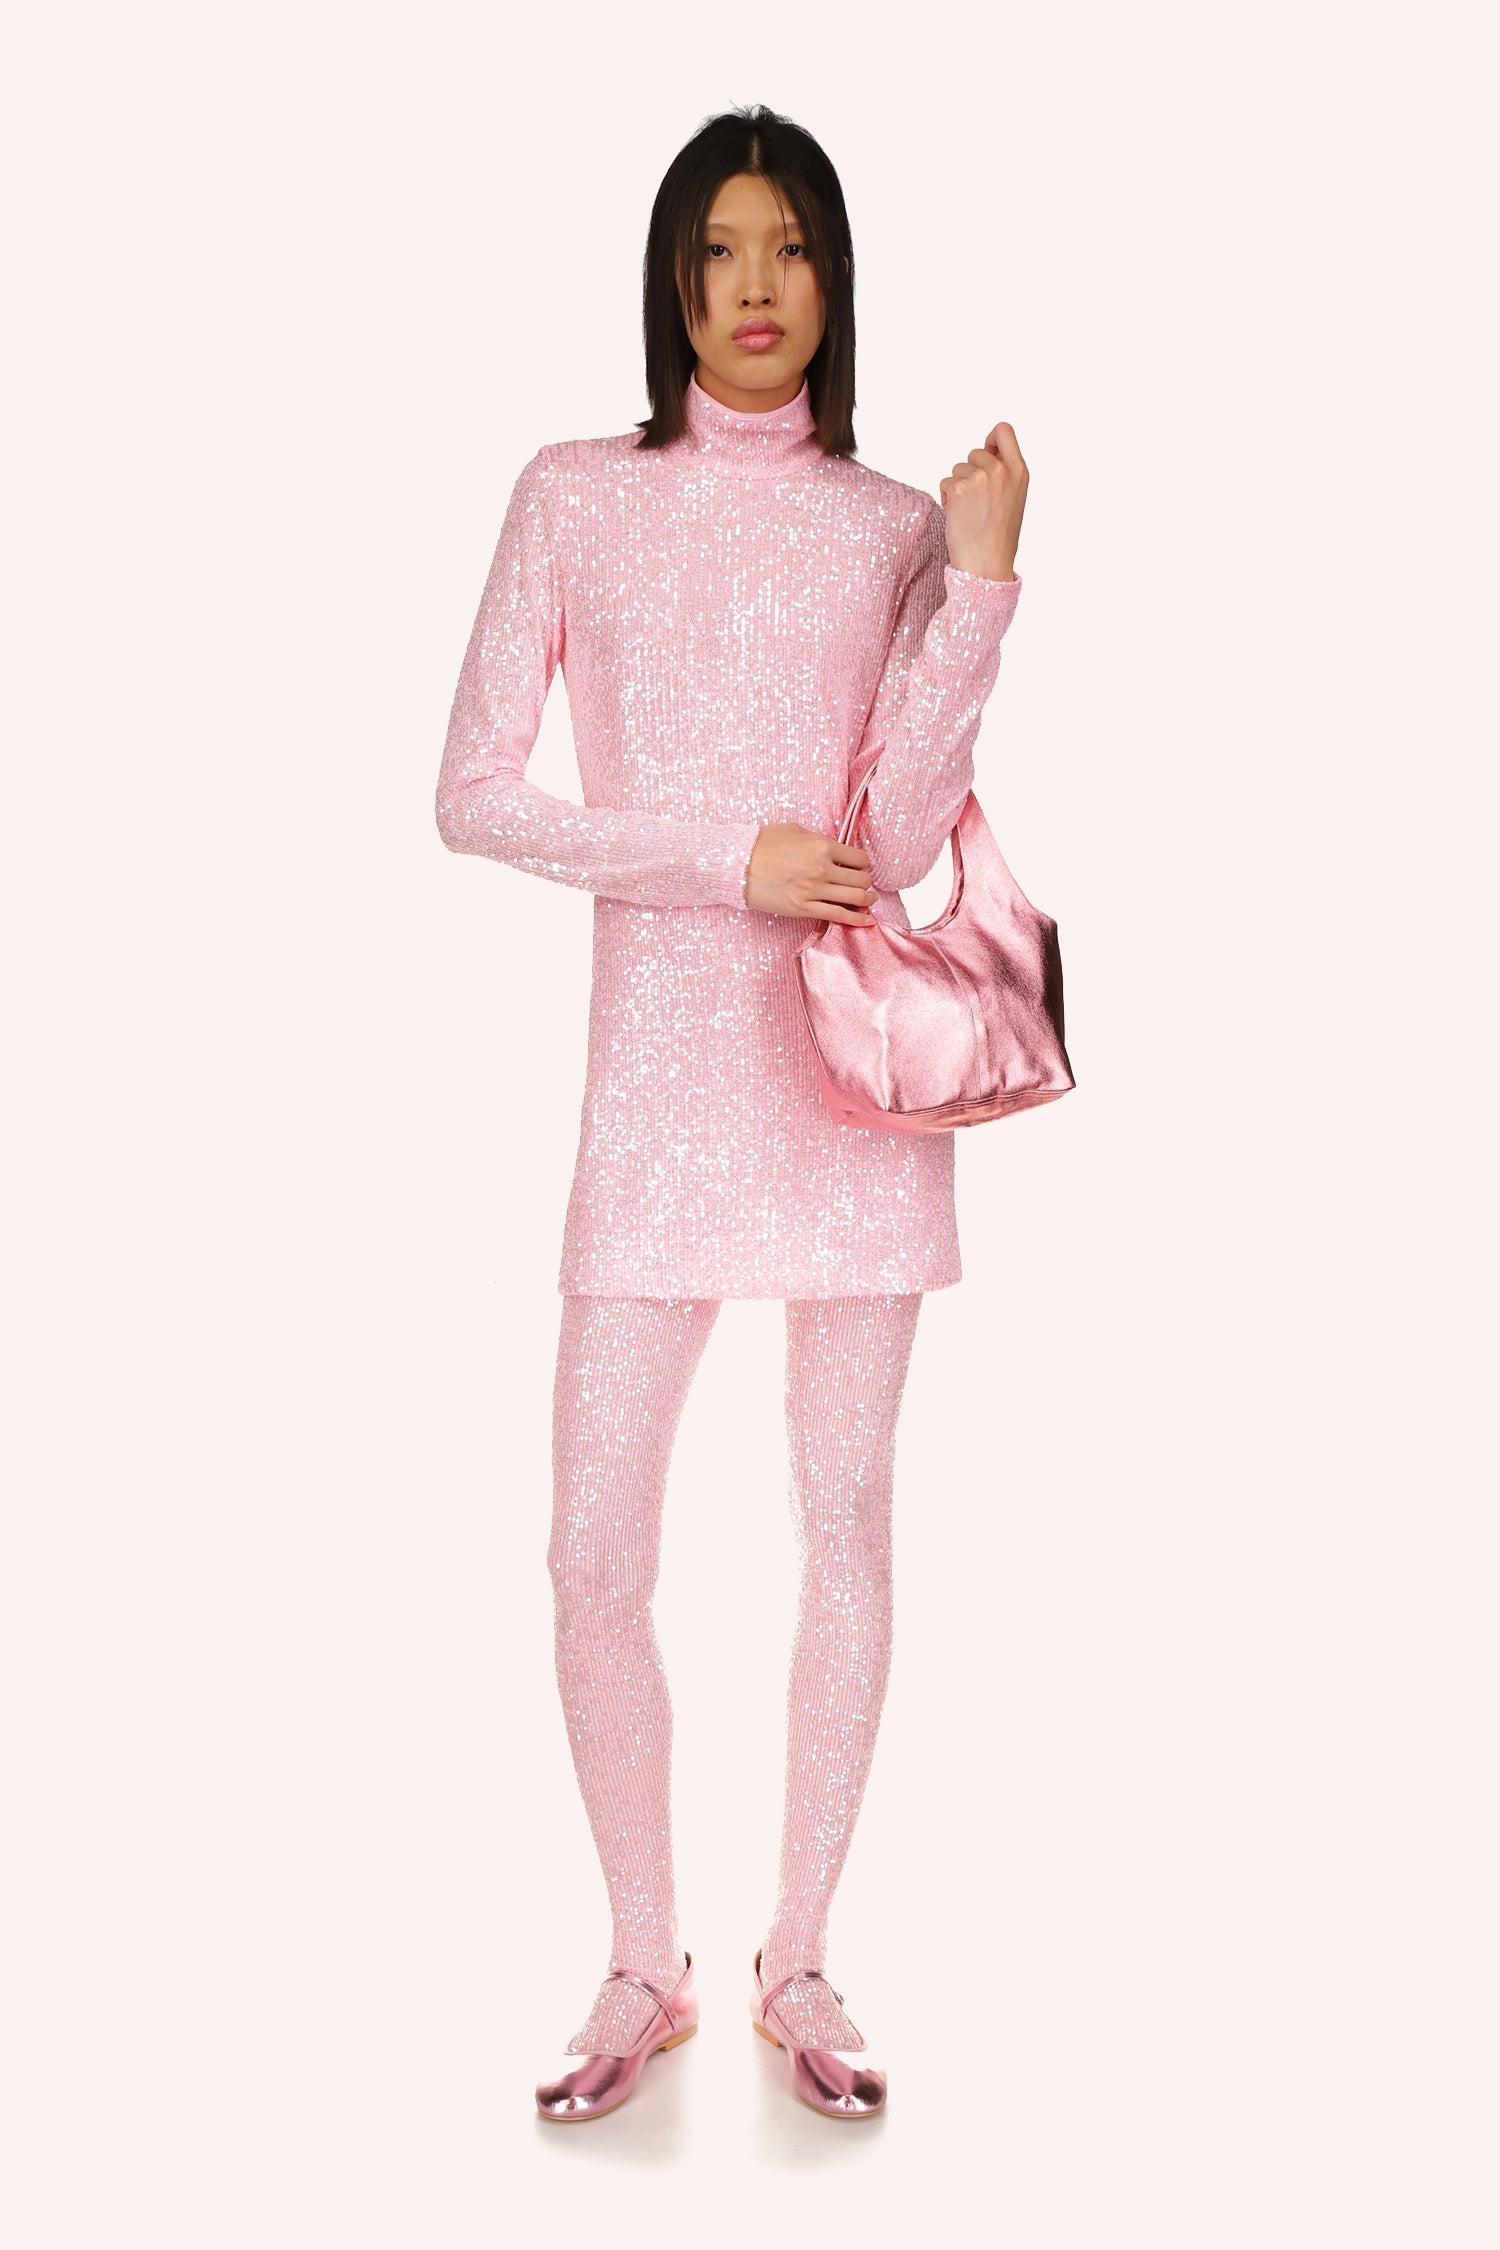 Turtleneck Dress Baby Pink, by Anna Sui, is an elegant and refined look in a delicate baby pink